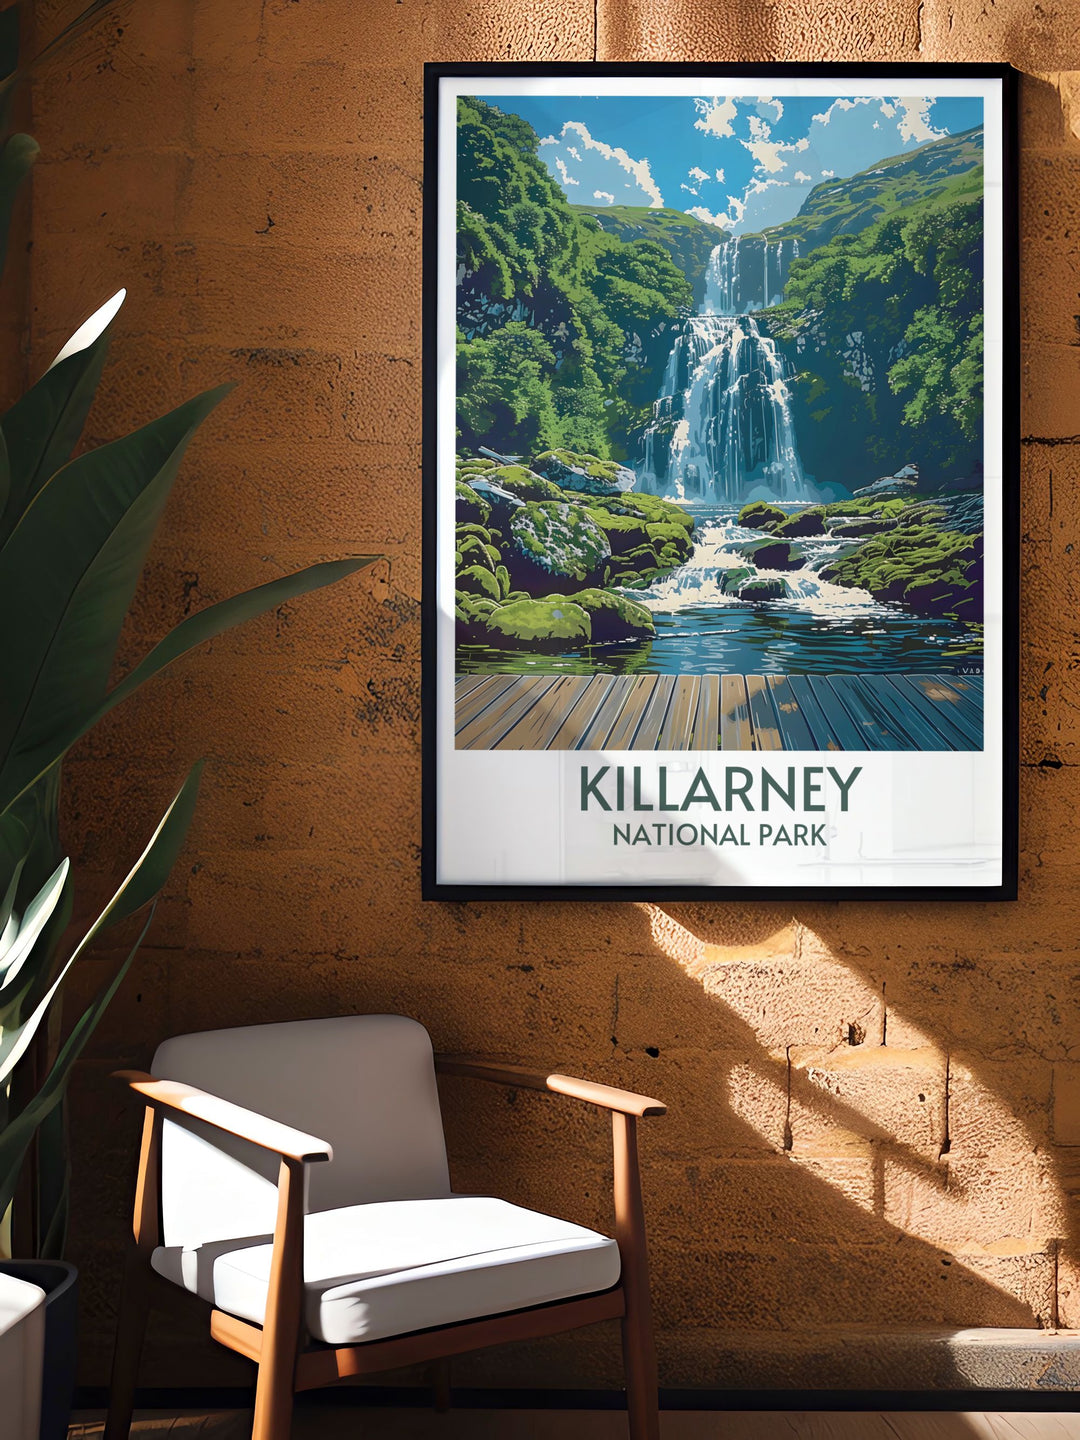 Gallery wall art of Killarney, offering a collage of the most picturesque spots in the national park.